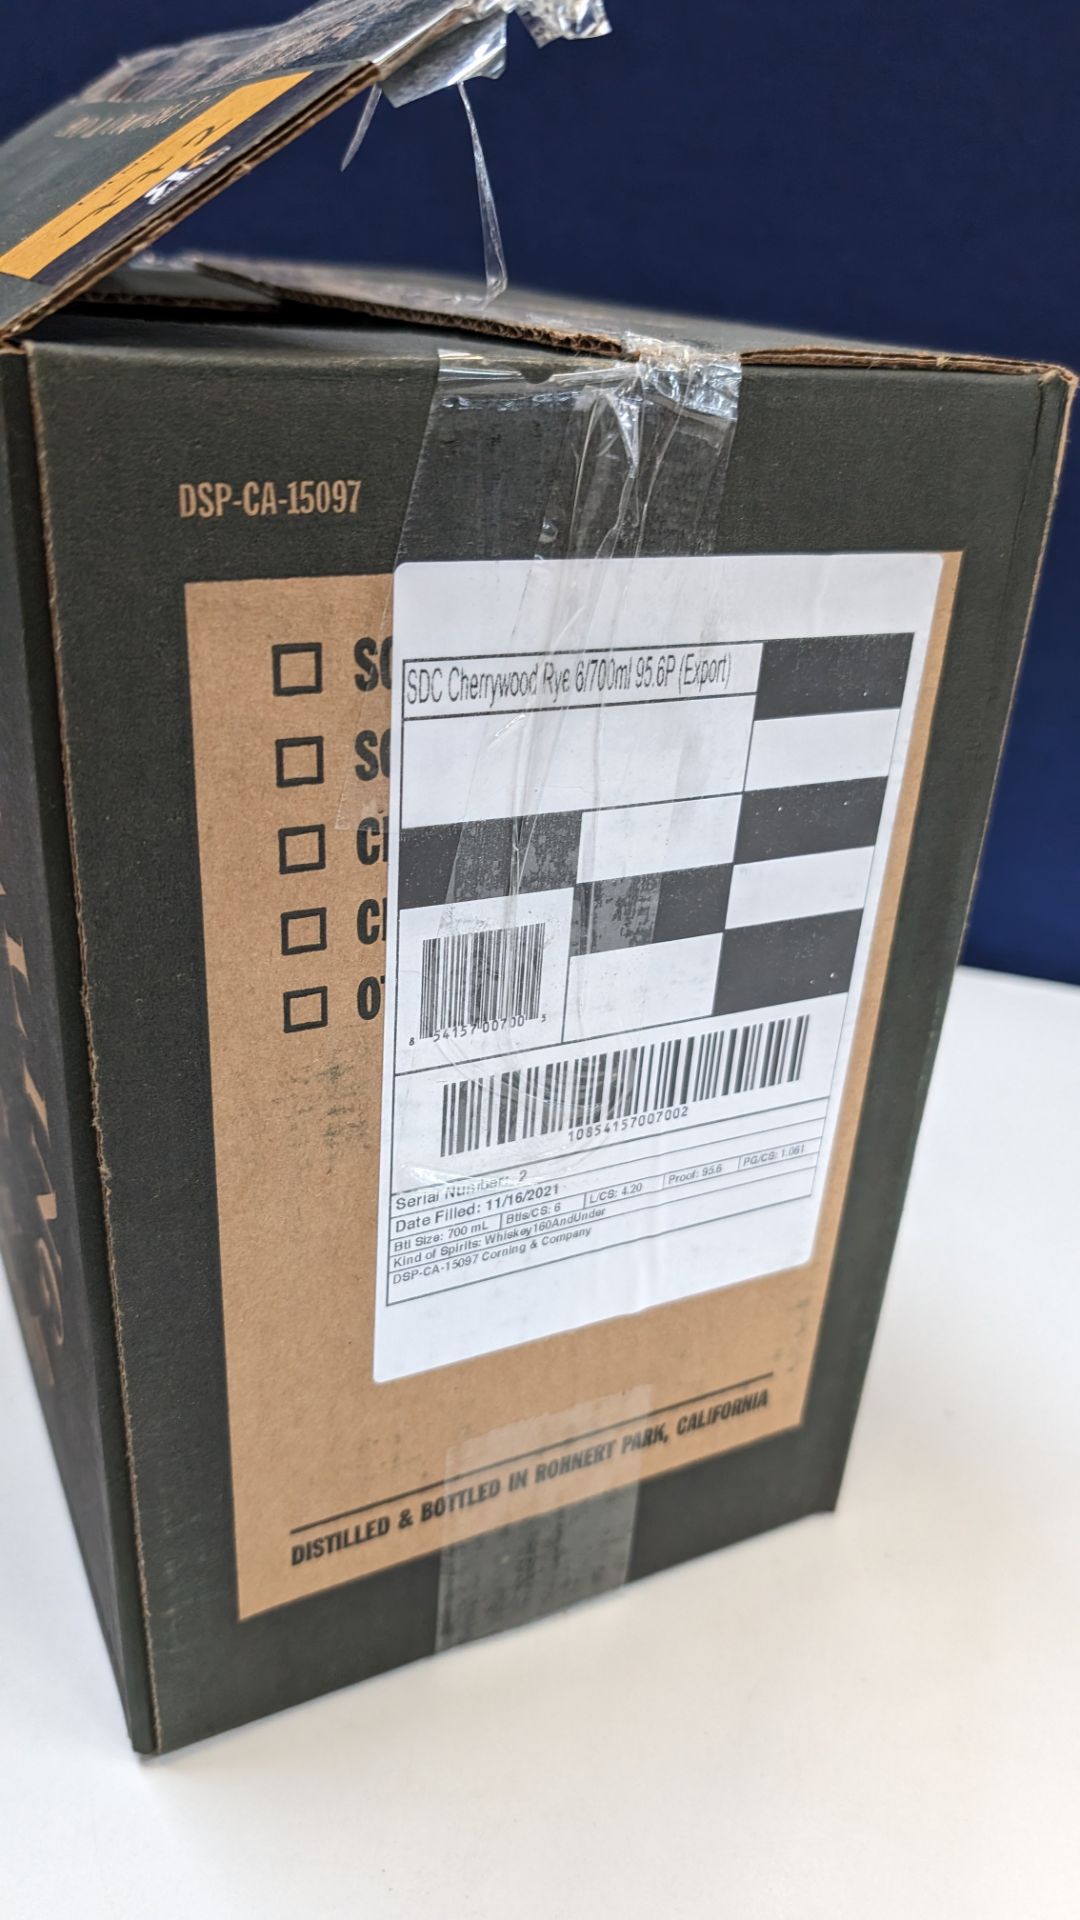 6 off 700ml bottles of Sonoma Cherrywood Rye Whiskey. In Sonoma branded box which includes bottling - Image 3 of 6